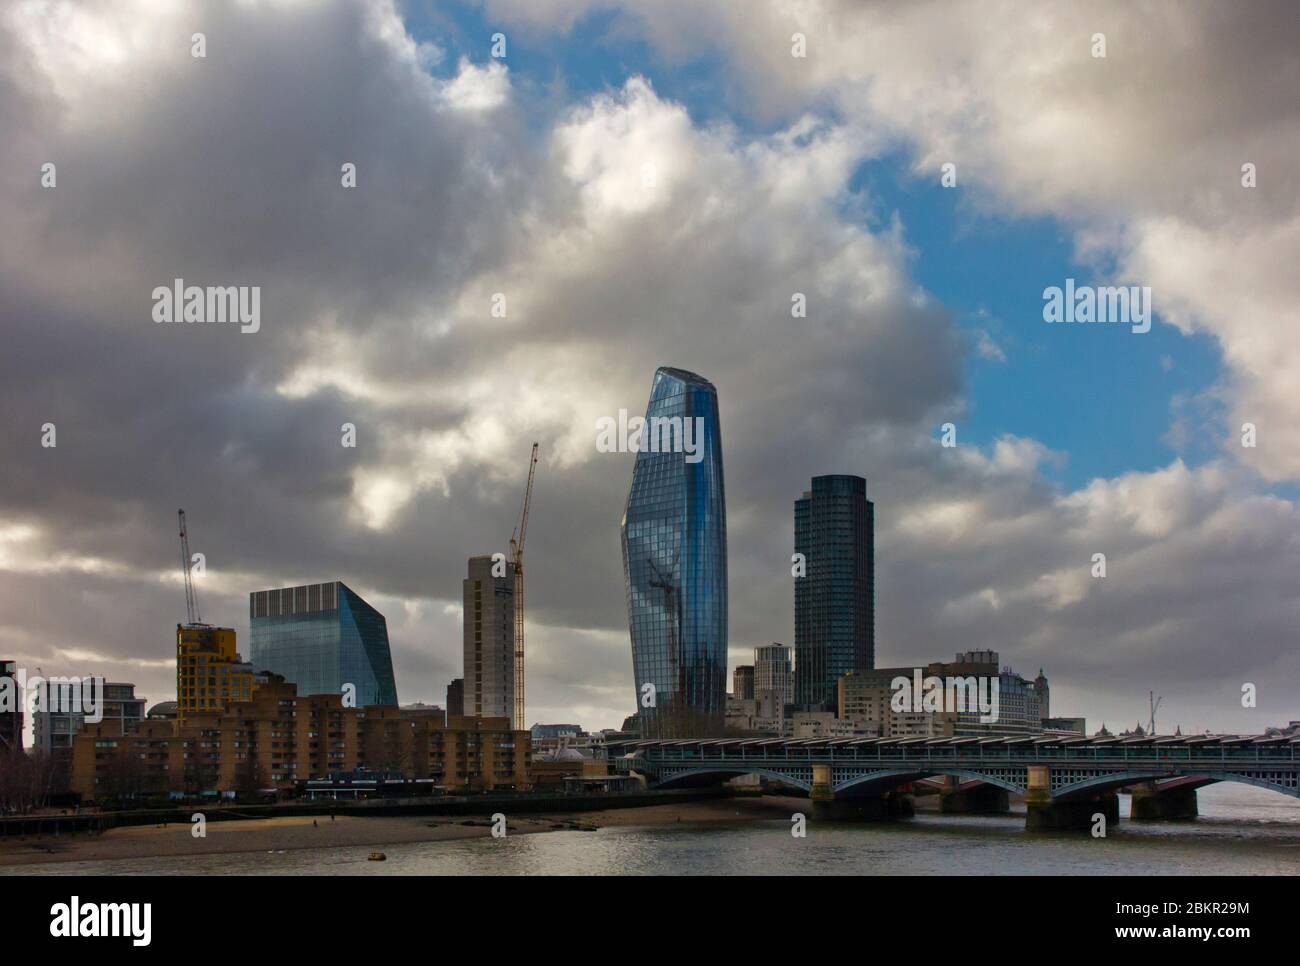 The London skyline showing the unusual shape of the One Blackfriars building also known as The Vase designed by Simpson Haugh and Partners. Stock Photo